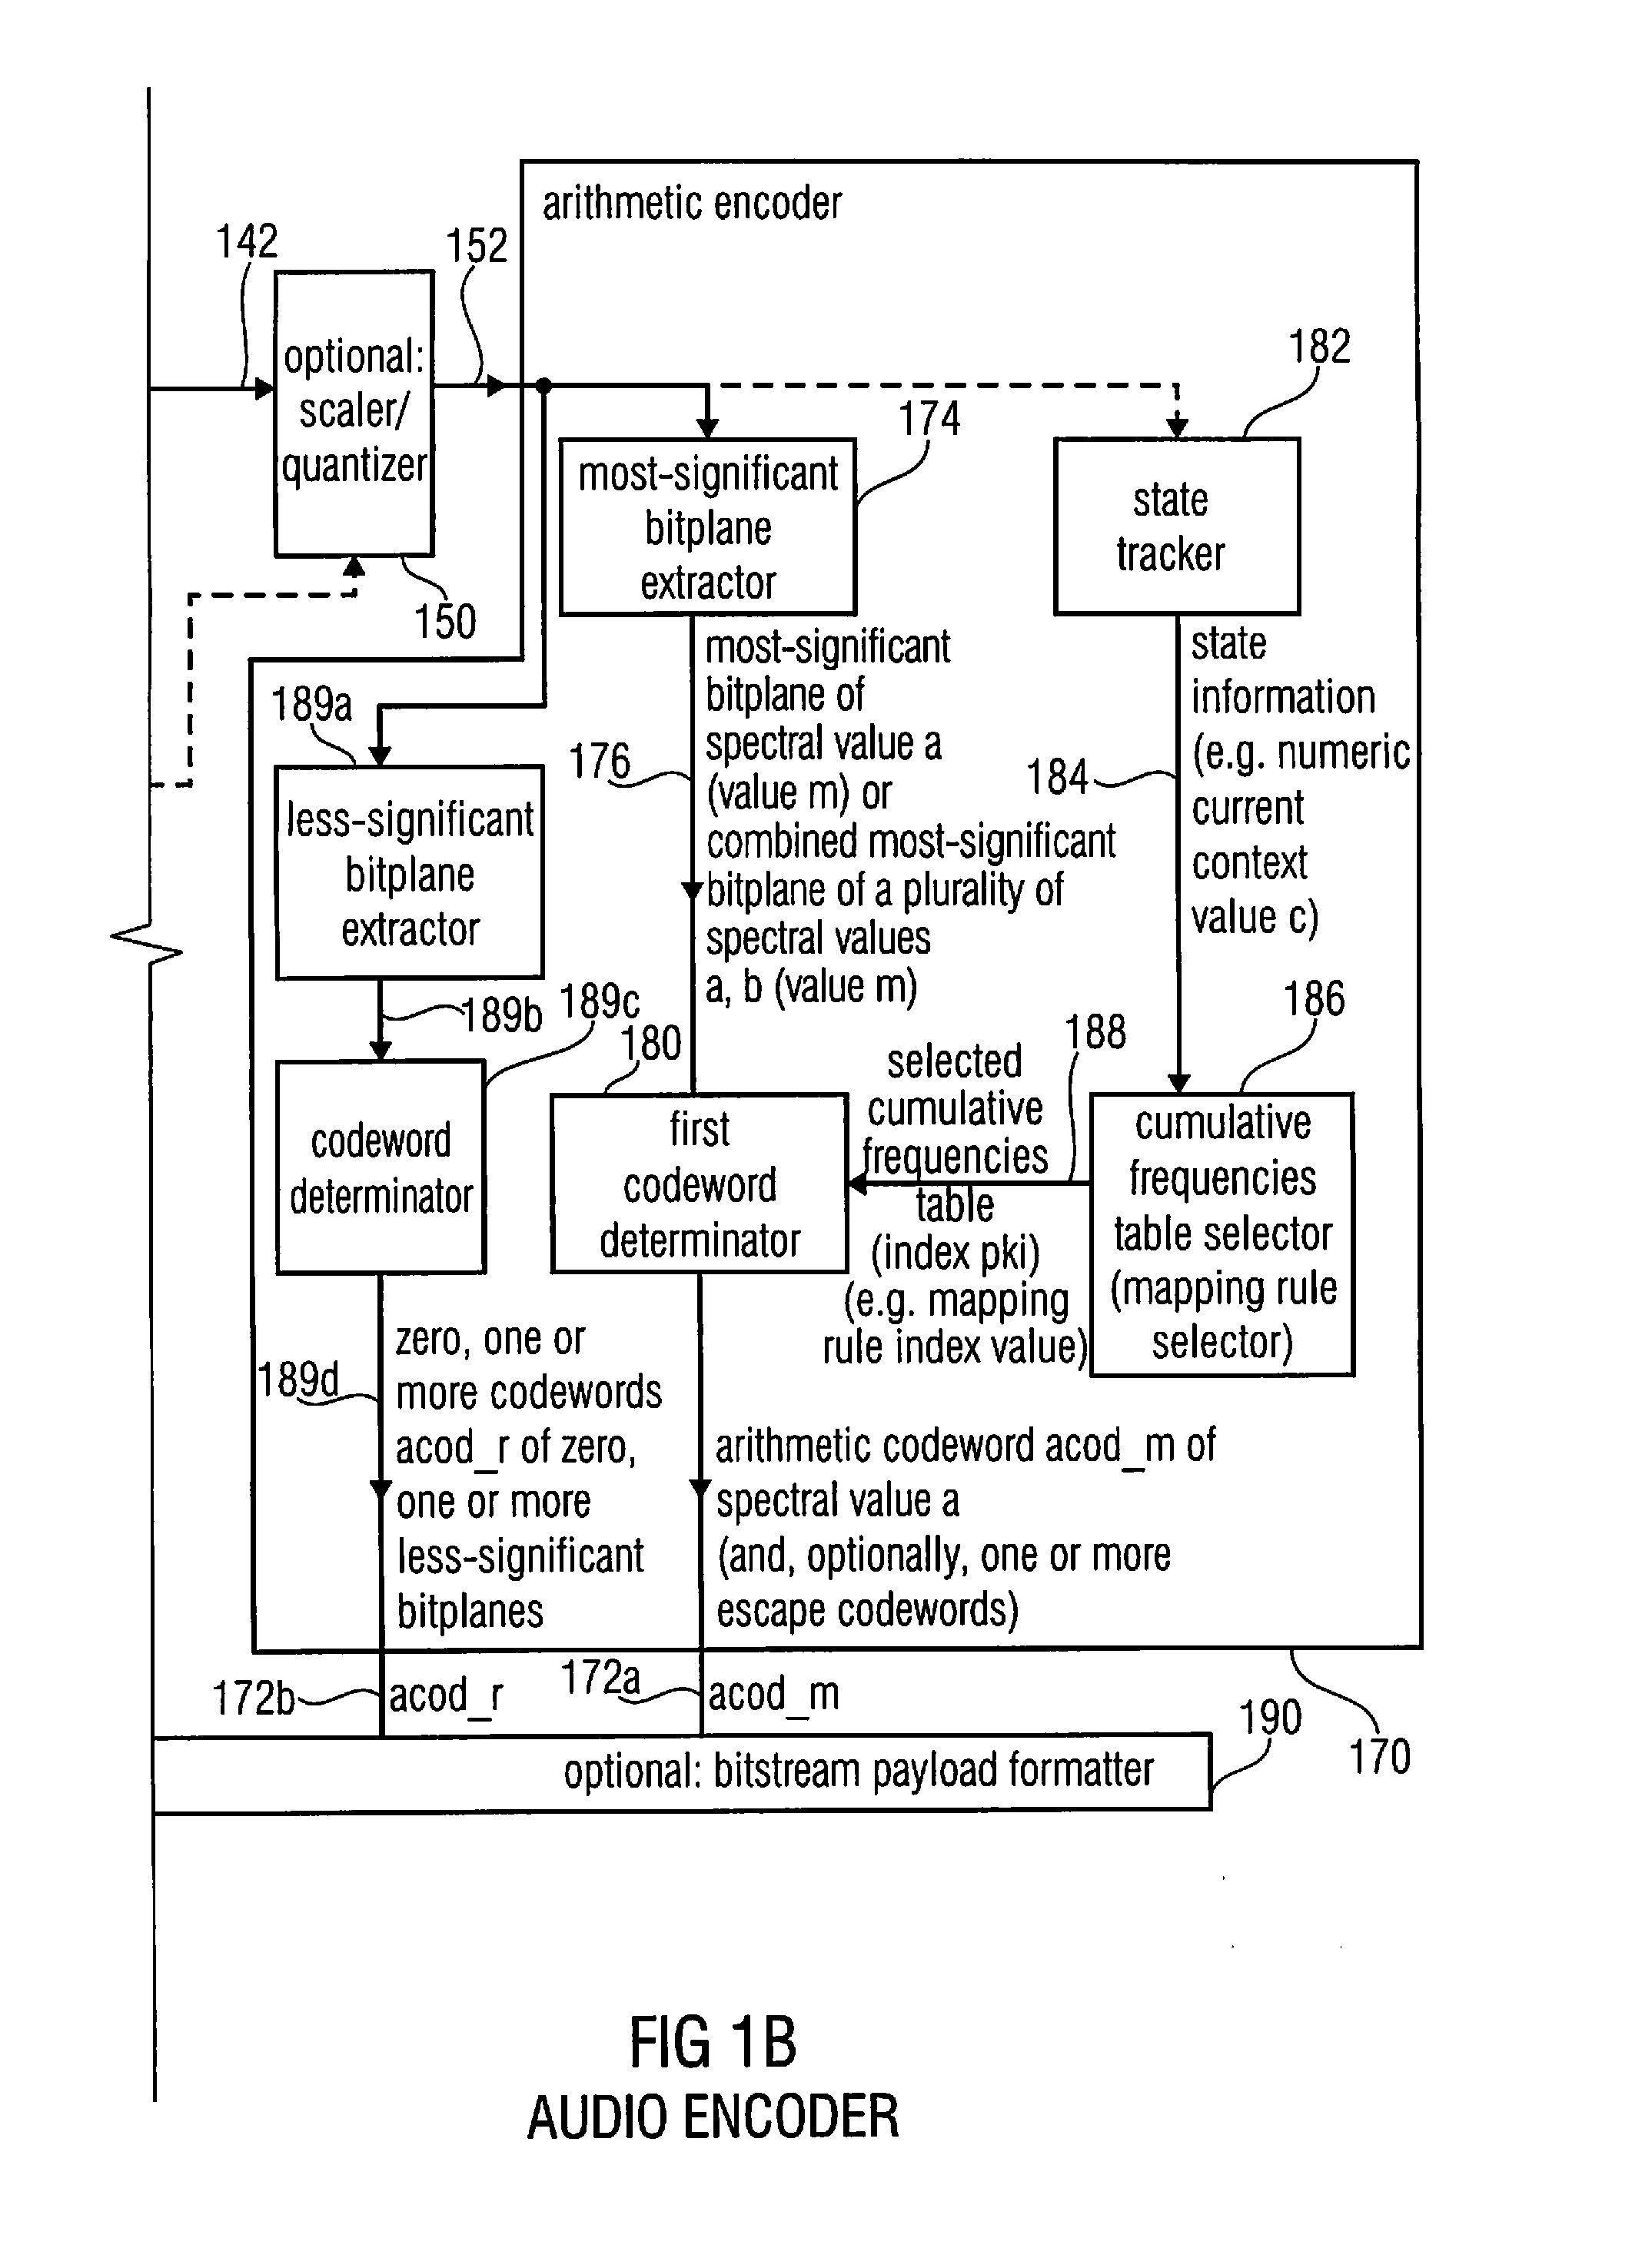 Audio encoder, audio decoder, method for encoding and audio information, method for decoding an audio information and computer program using an optimized hash table